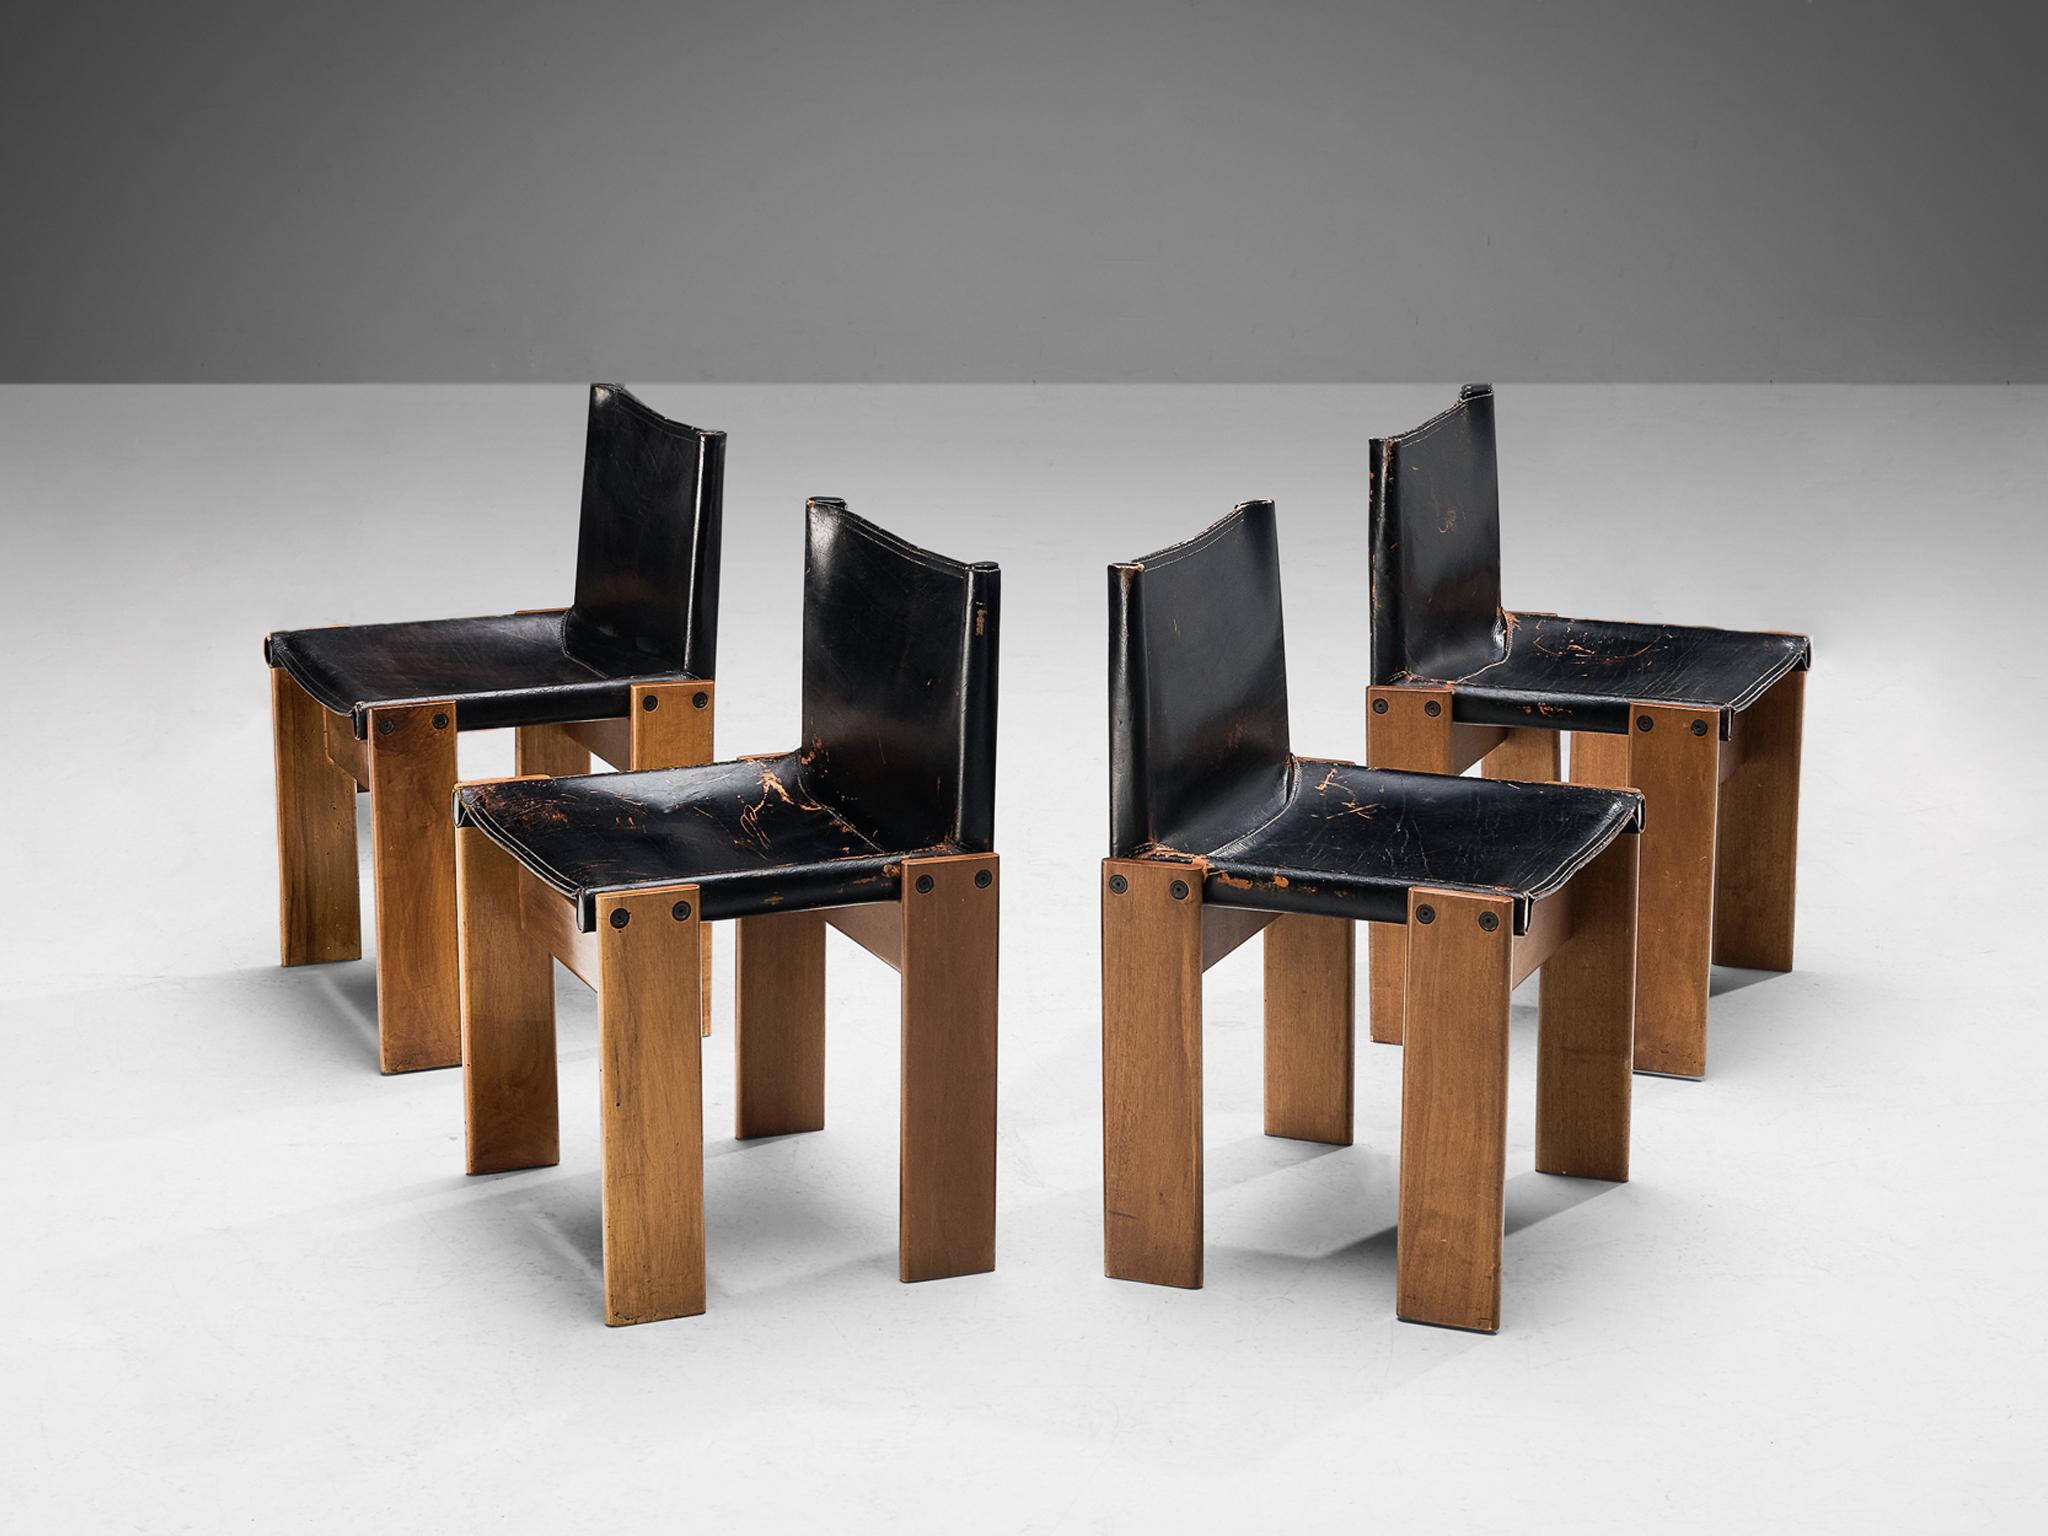 Afra & Tobia Scarpa for Molteni, set of four 'Monk' dining chairs, walnut, leather, Italy, 1974.

Set of four 'Monk' chairs by Italian designers Afra & Tobia Scarpa. The black leather shows beautiful patina and forms a striking combination with